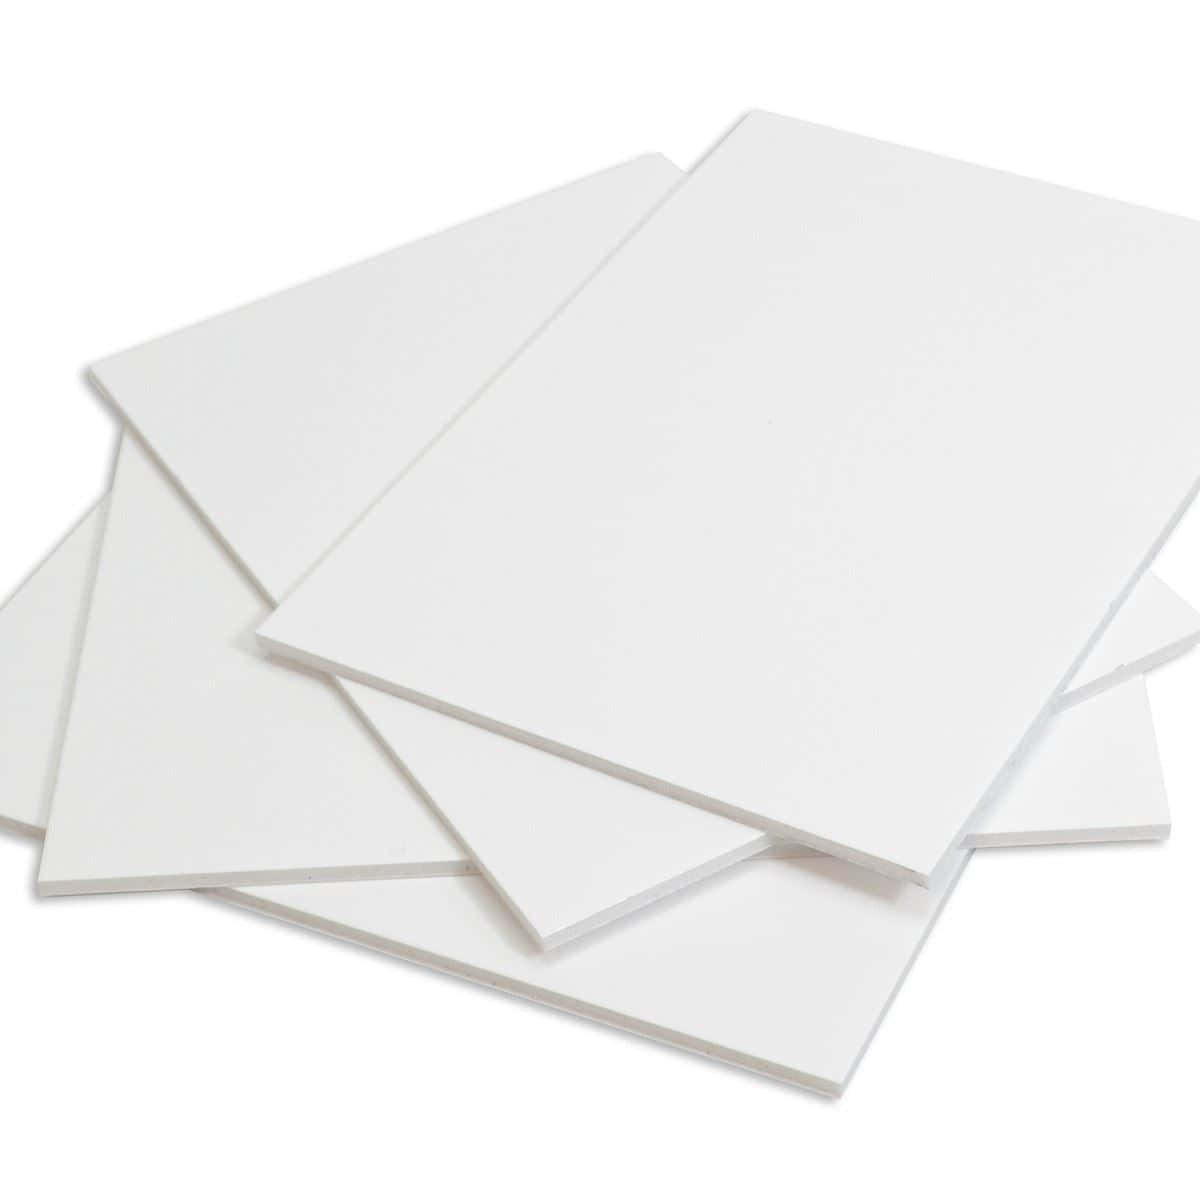 A Stack Of White Paper On A White Surface